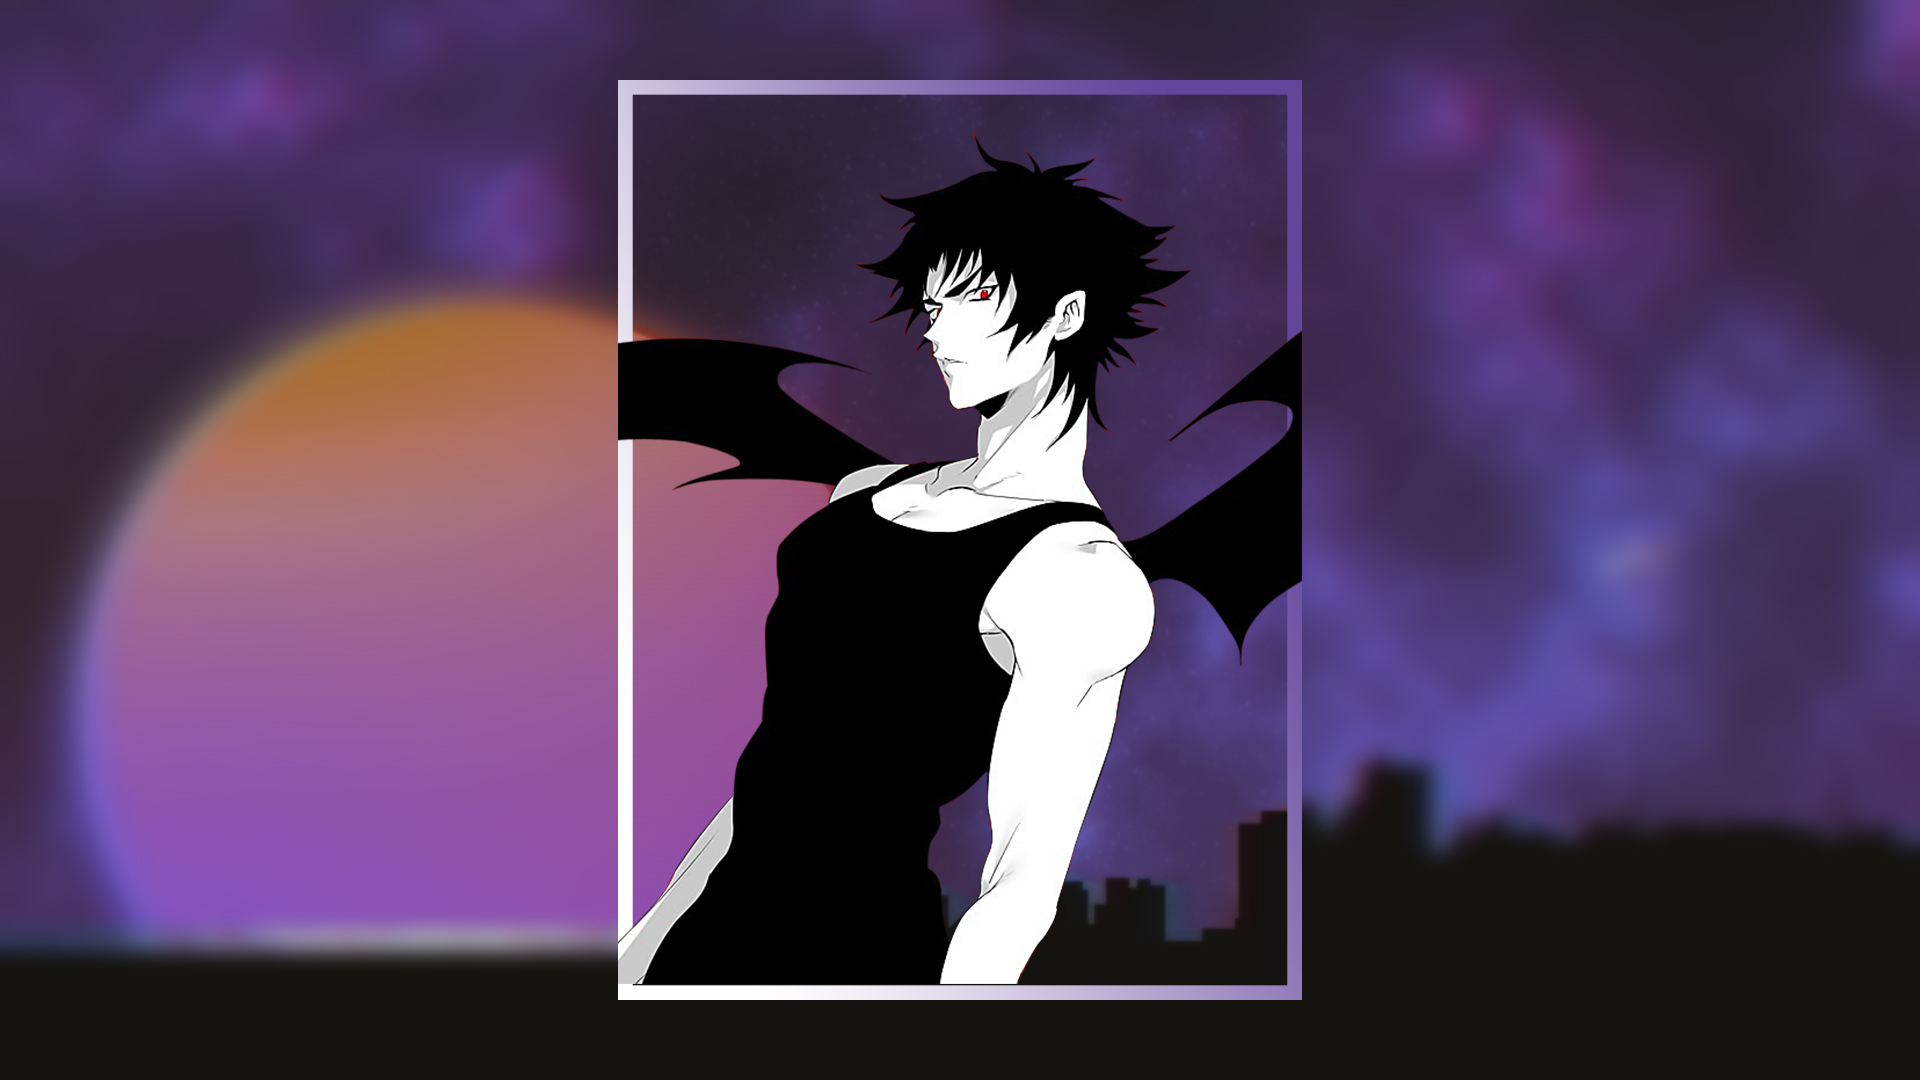 Anime 1920x1080 picture-in-picture Devilman Crybaby vaporwave